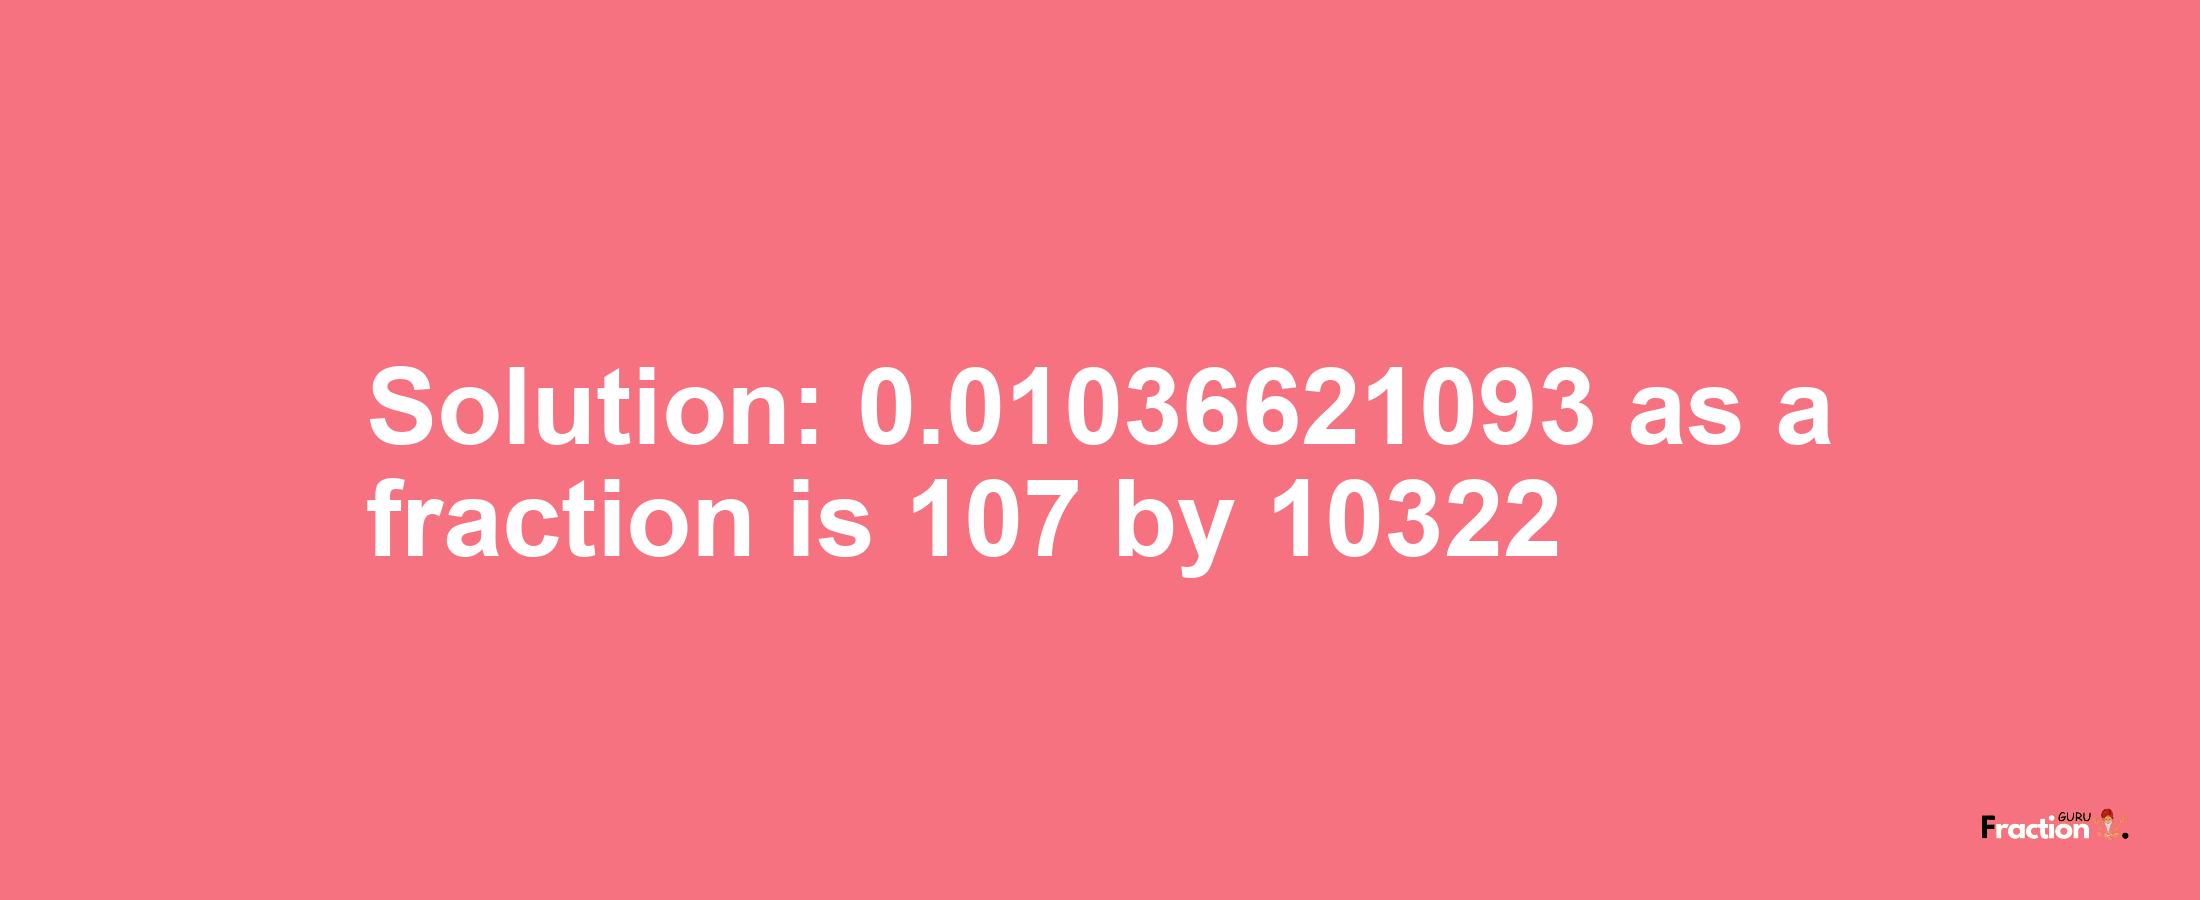 Solution:0.01036621093 as a fraction is 107/10322